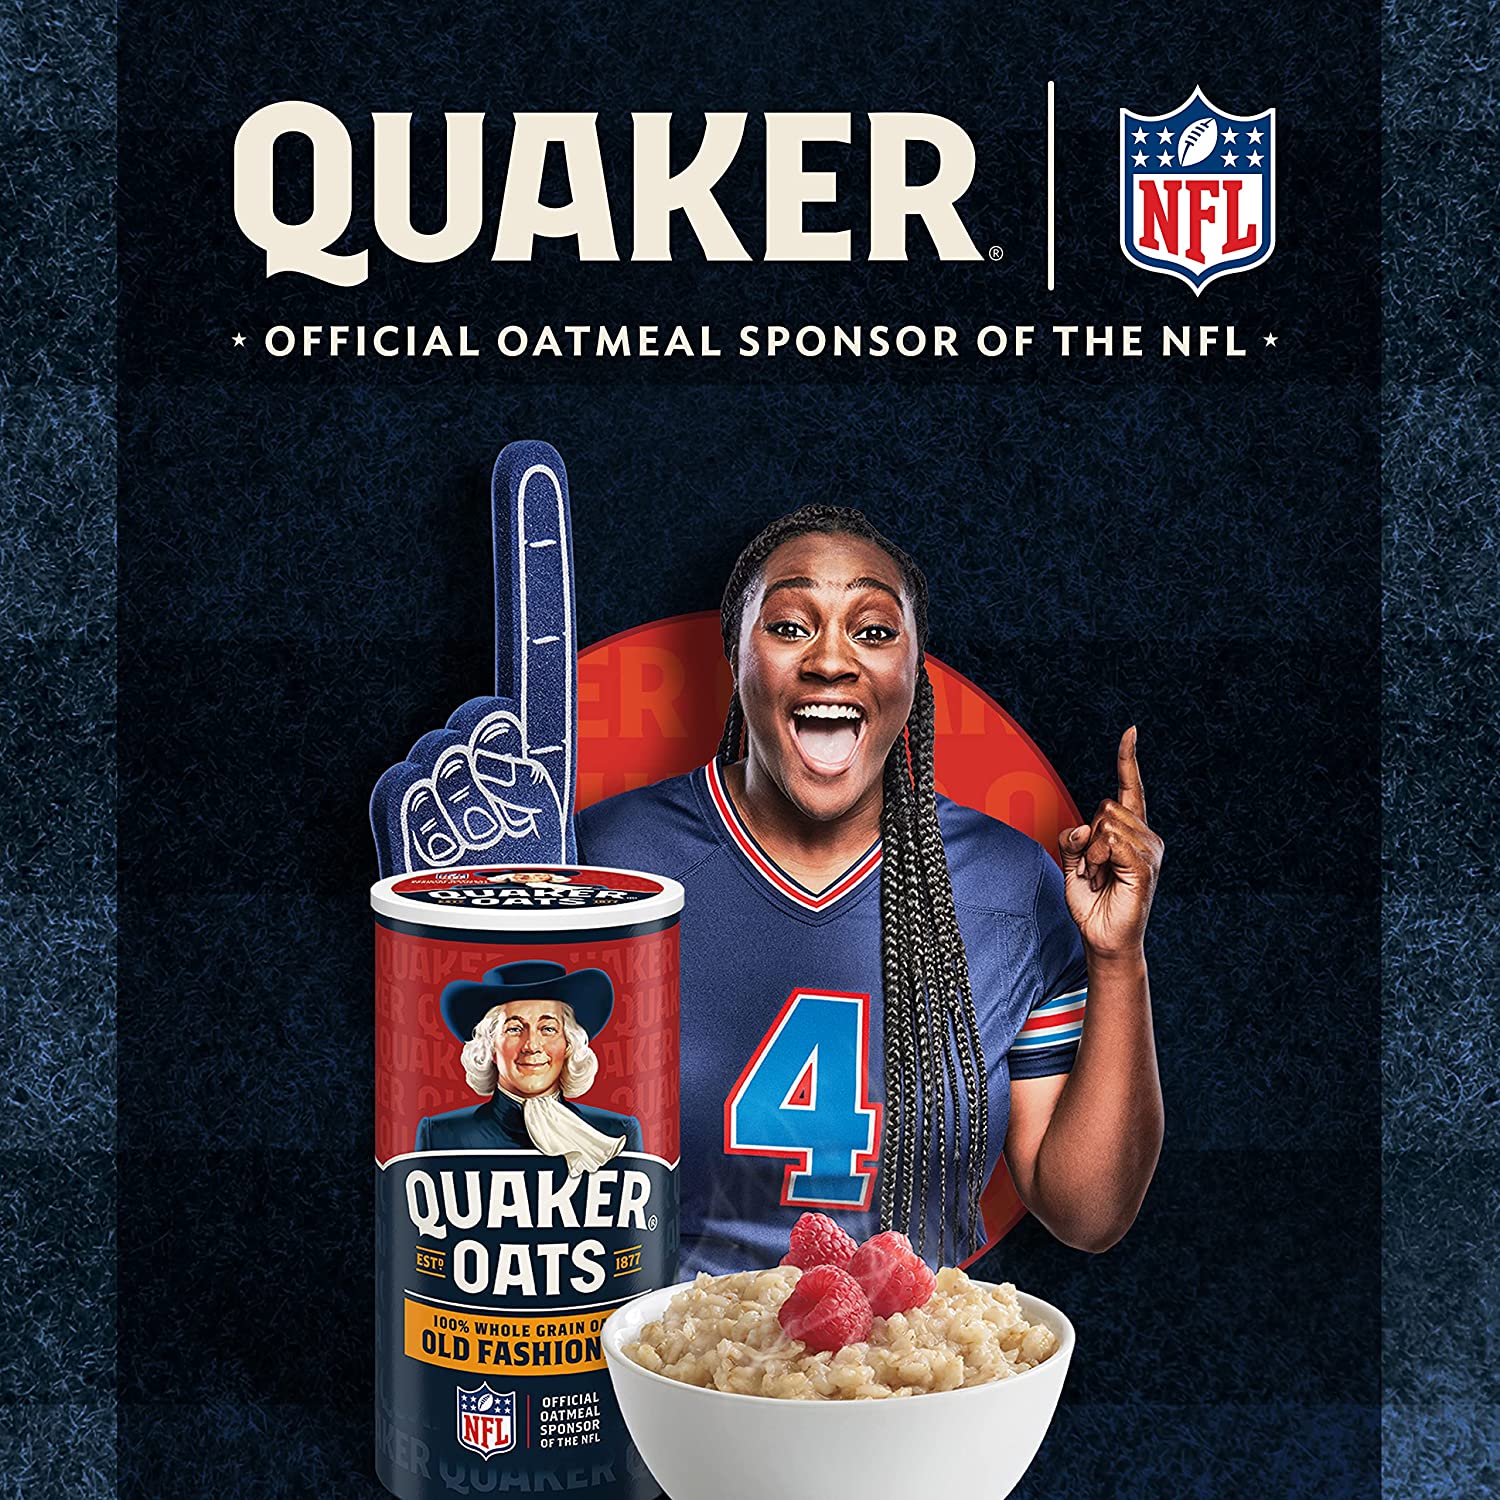 Quaker, Old Fashioned Oatmeal, Whole Grain, Cook on Stovetop or Microwave, 42 oz Canister - image 5 of 7